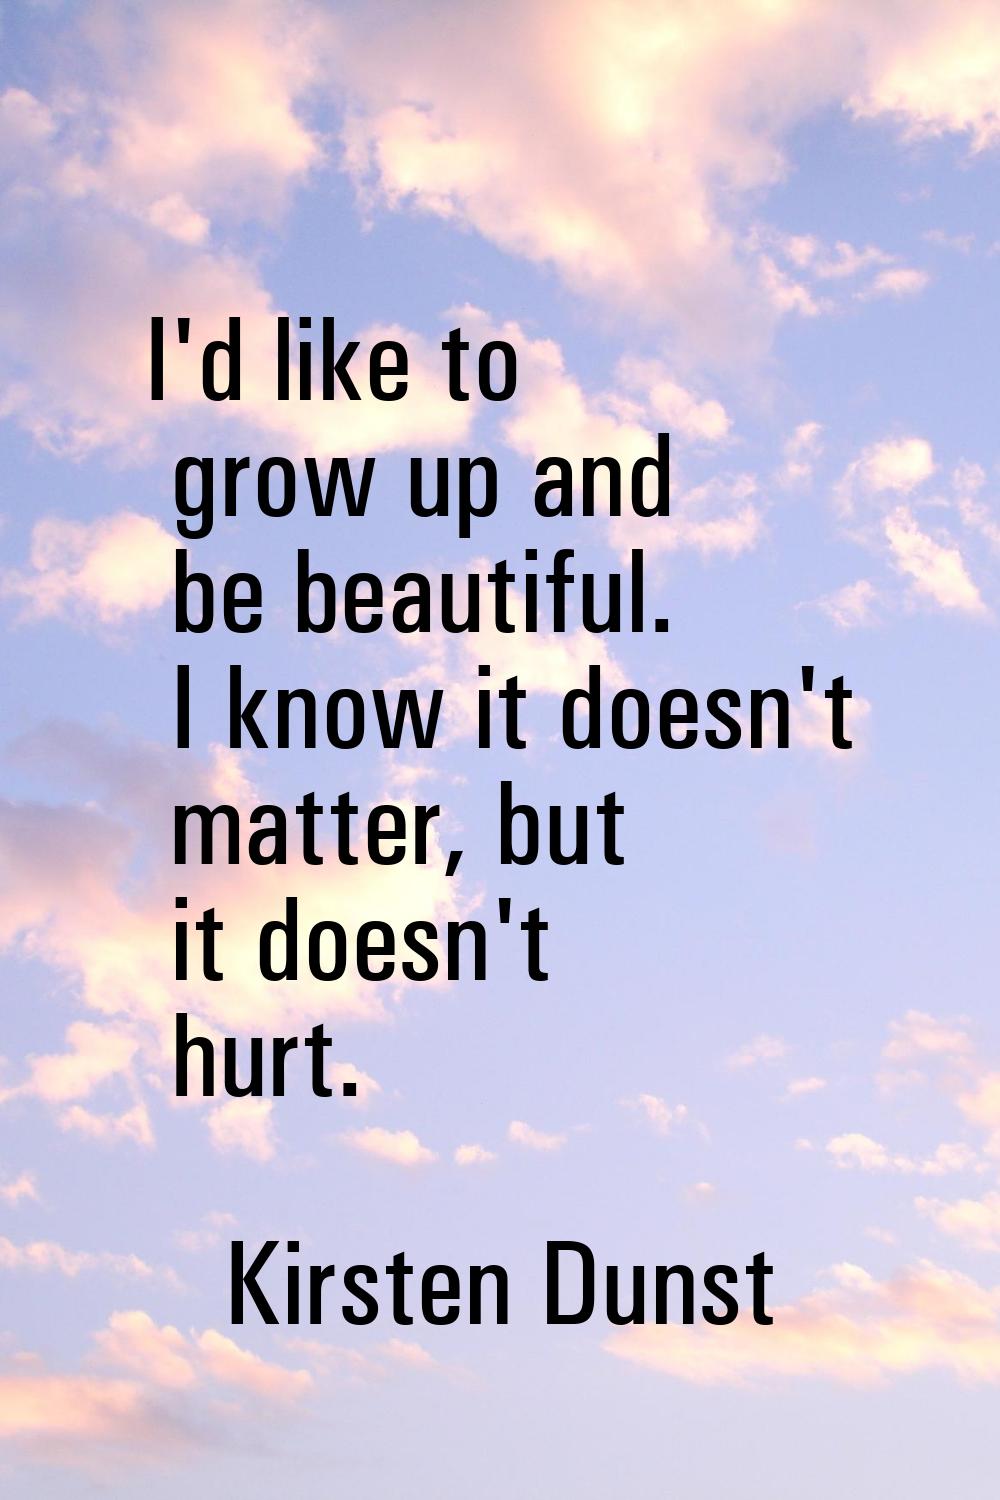 I'd like to grow up and be beautiful. I know it doesn't matter, but it doesn't hurt.